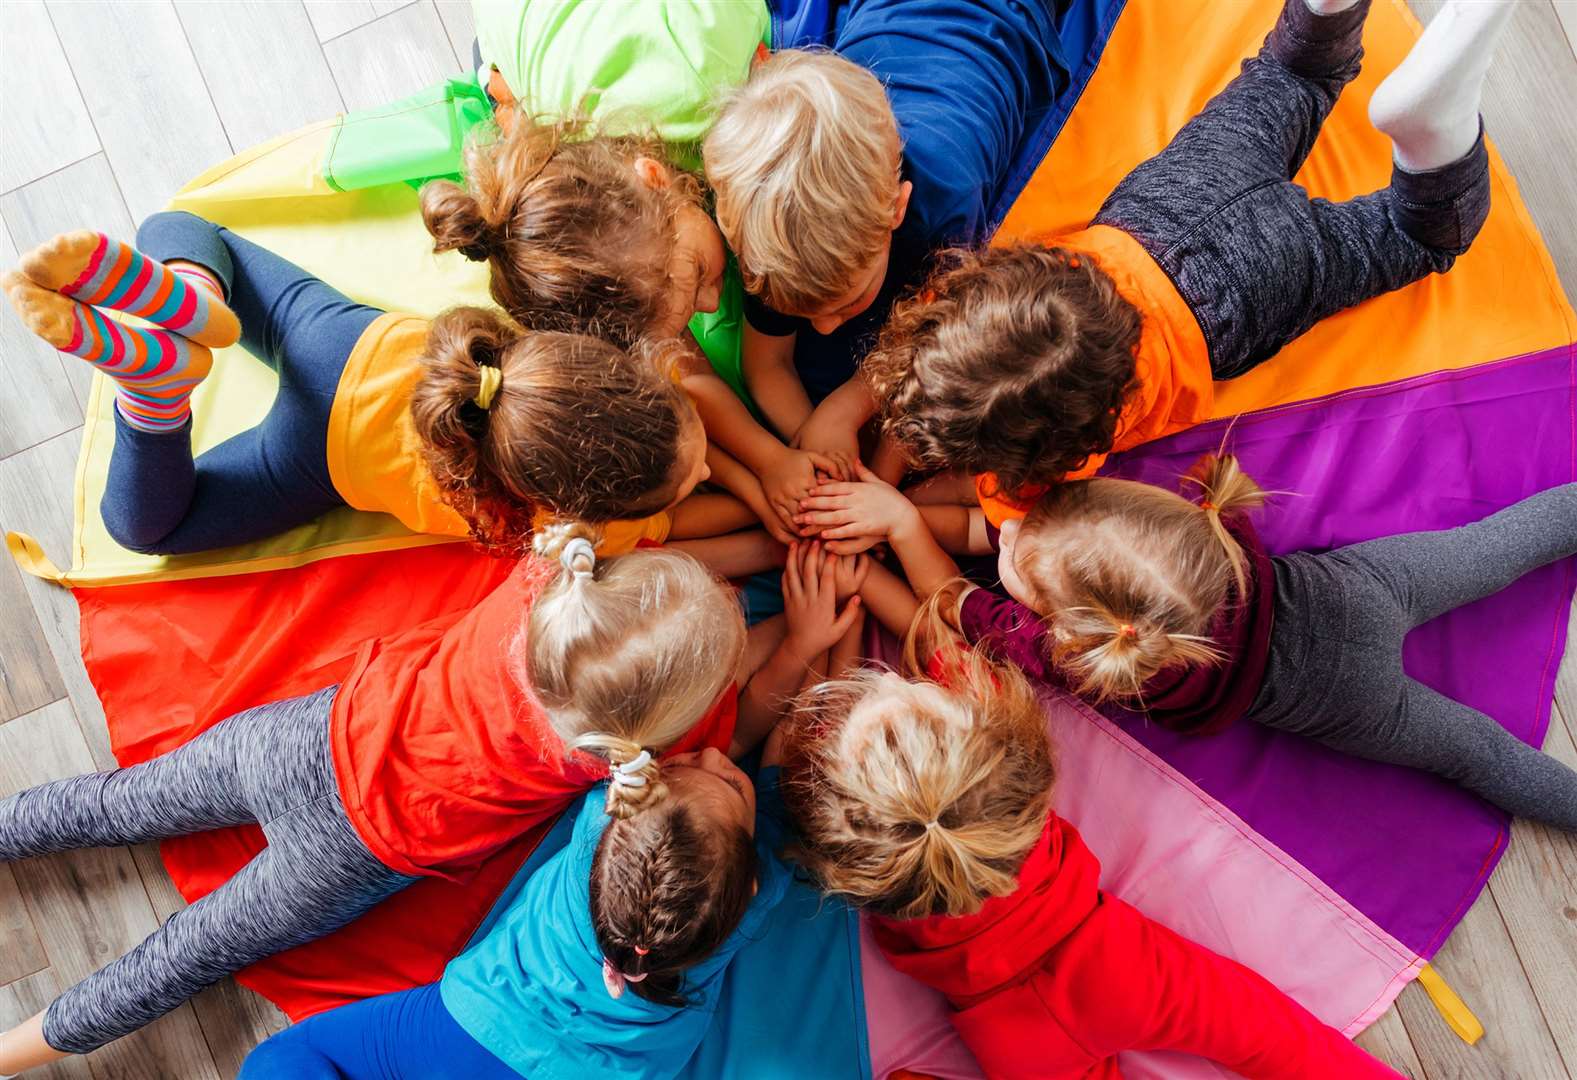 Lovely children laying on multicolor canopy in circle. Team building game for daycare children in colorful t-shirts. Top view kids on wooden floor.